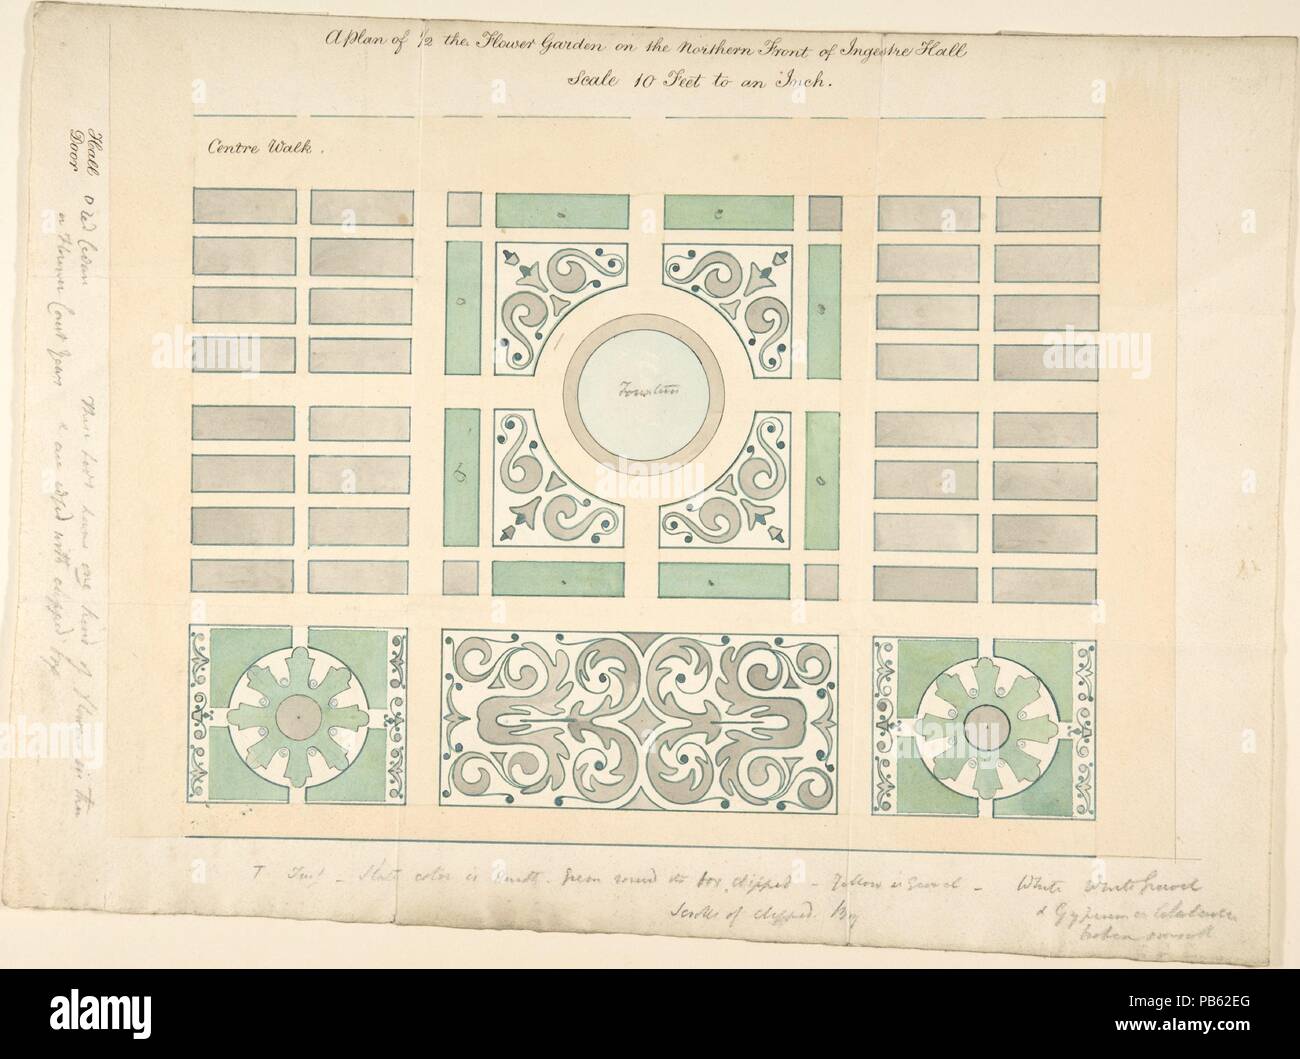 Plan of the Flower Garden on the Northern Front, Ingestre Hall, Staffordshire. Artist: Sir Charles Chetwynd, 2nd Earl Talbot (British, 1777-1849). Dimensions: sheet: 10 1/2 x 14 1/2 in. (26.7 x 36.8 cm). Date: 1836. Museum: Metropolitan Museum of Art, New York, USA. Stock Photo